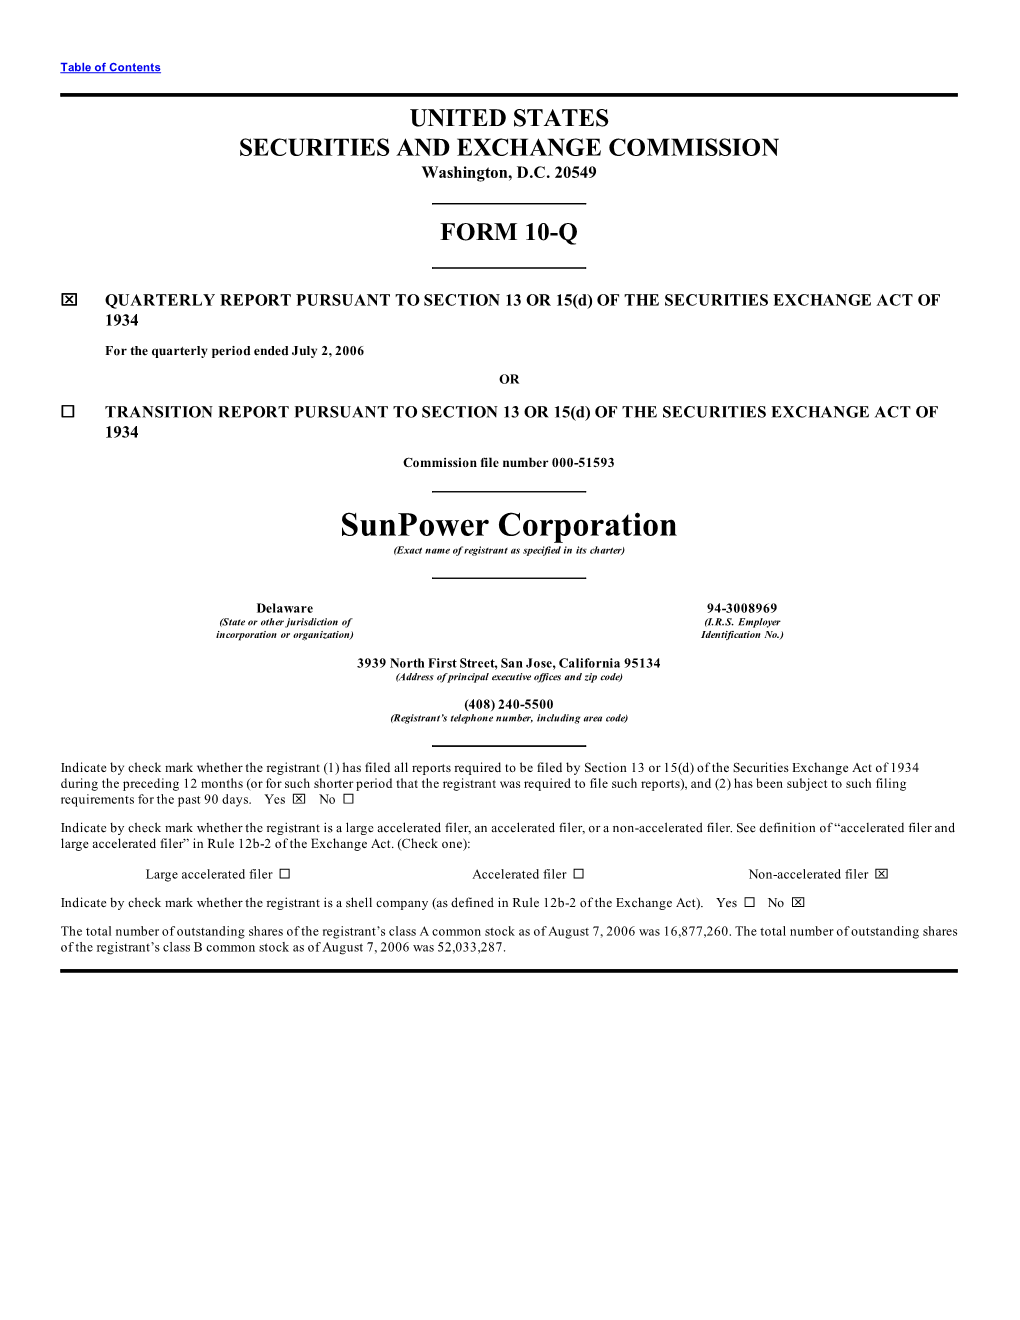 Sunpower Corporation (Exact Name of Registrant As Specified in Its Charter)